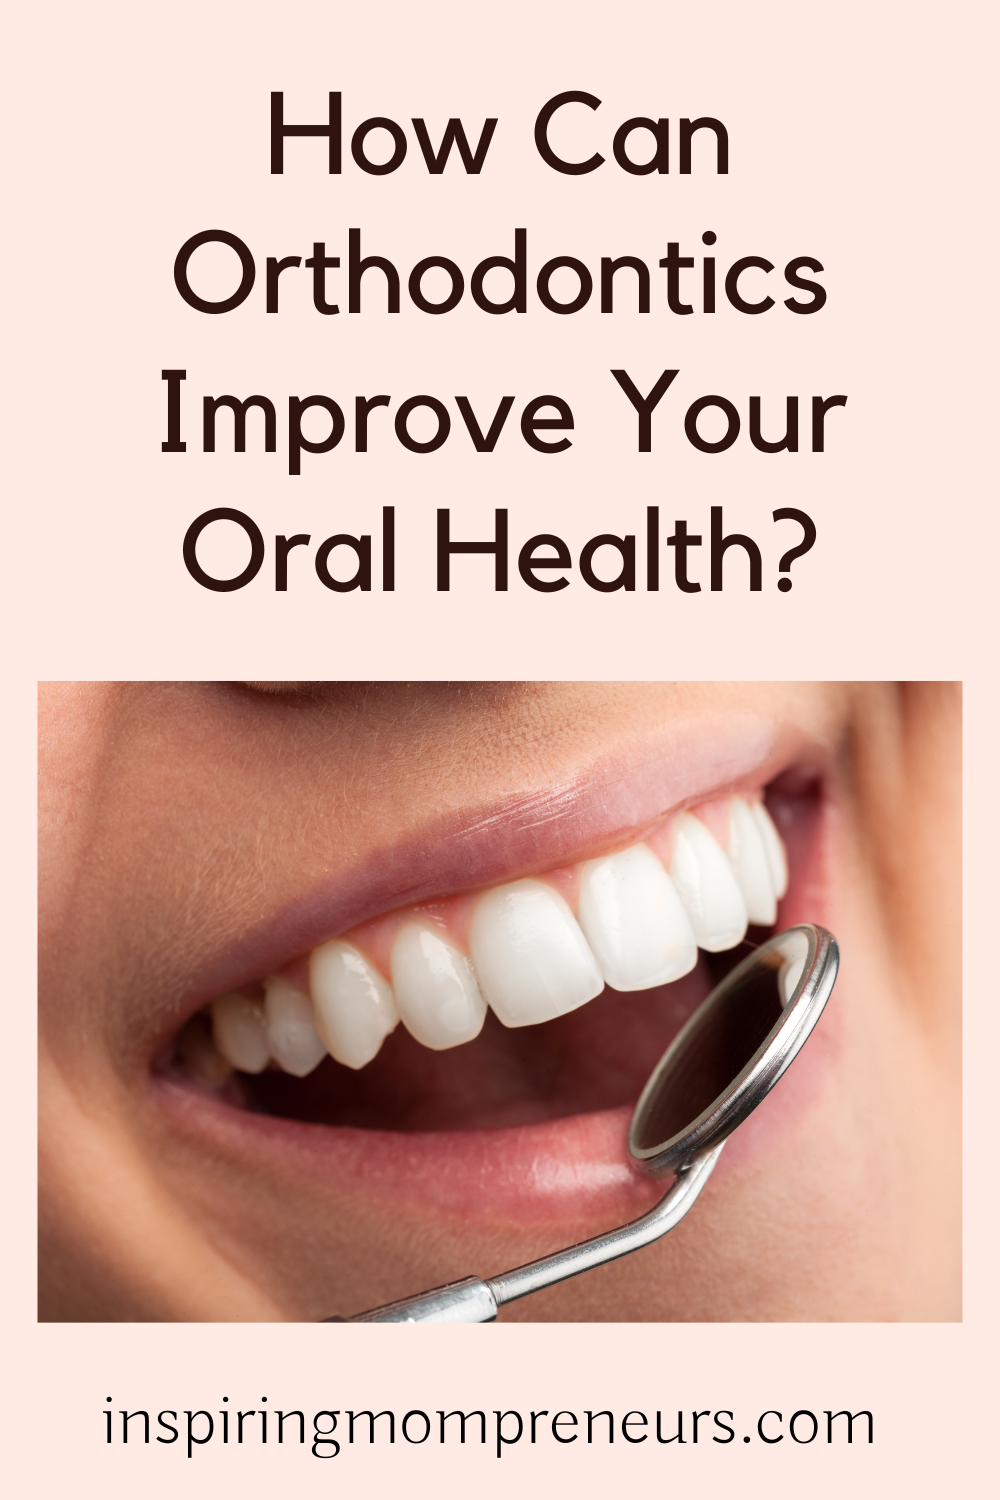 How Can Orthodontics Improve Your Oral Health? | How Can Orthodontics Improve Your Oral Health pin